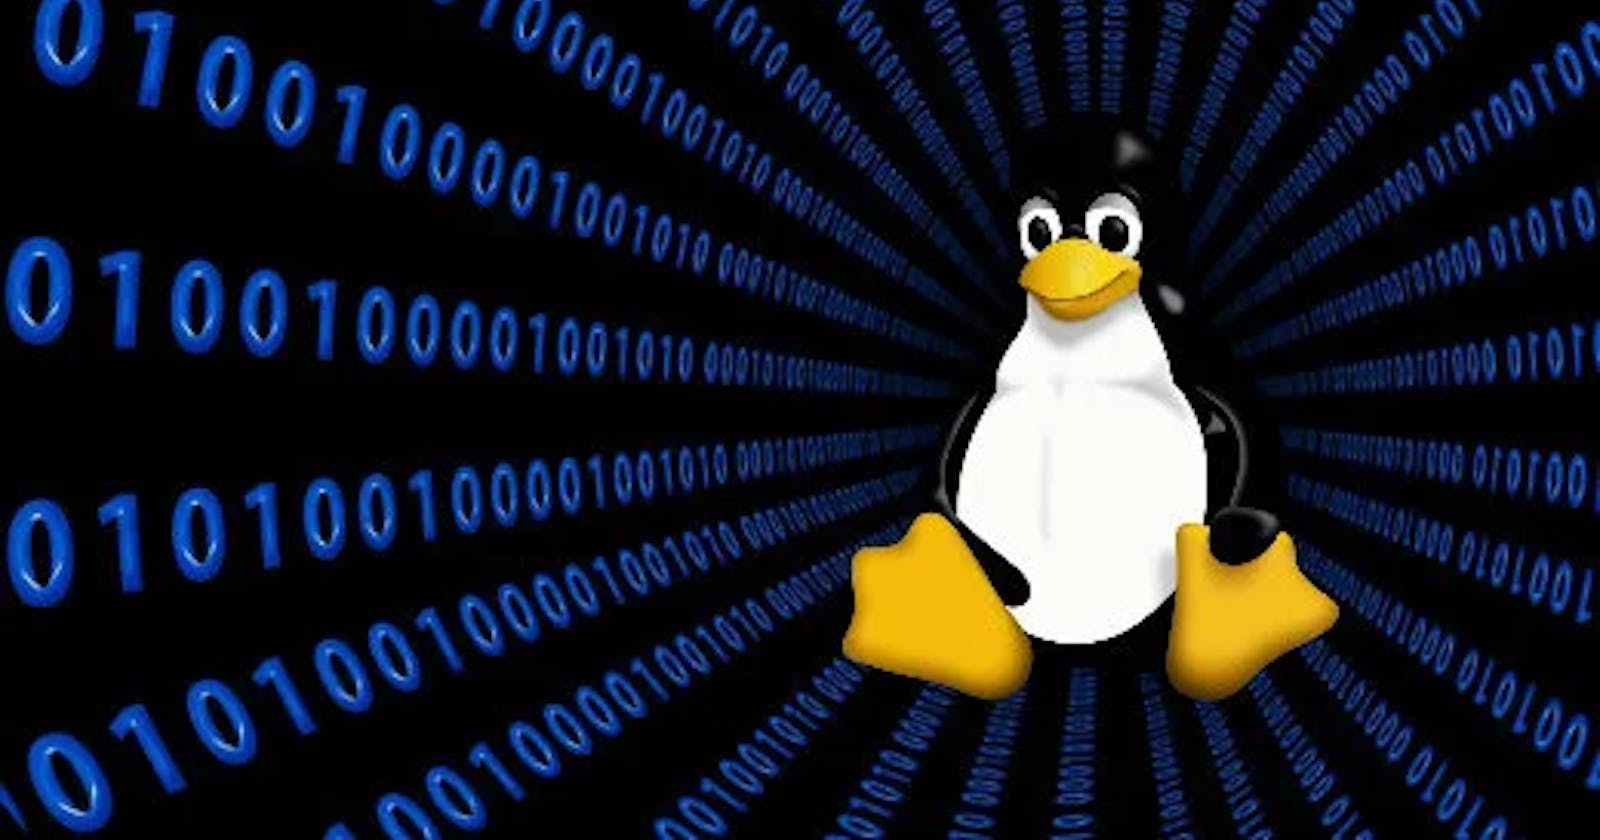 Linux Kernel Development: An Introduction to Kernel Development and Customization